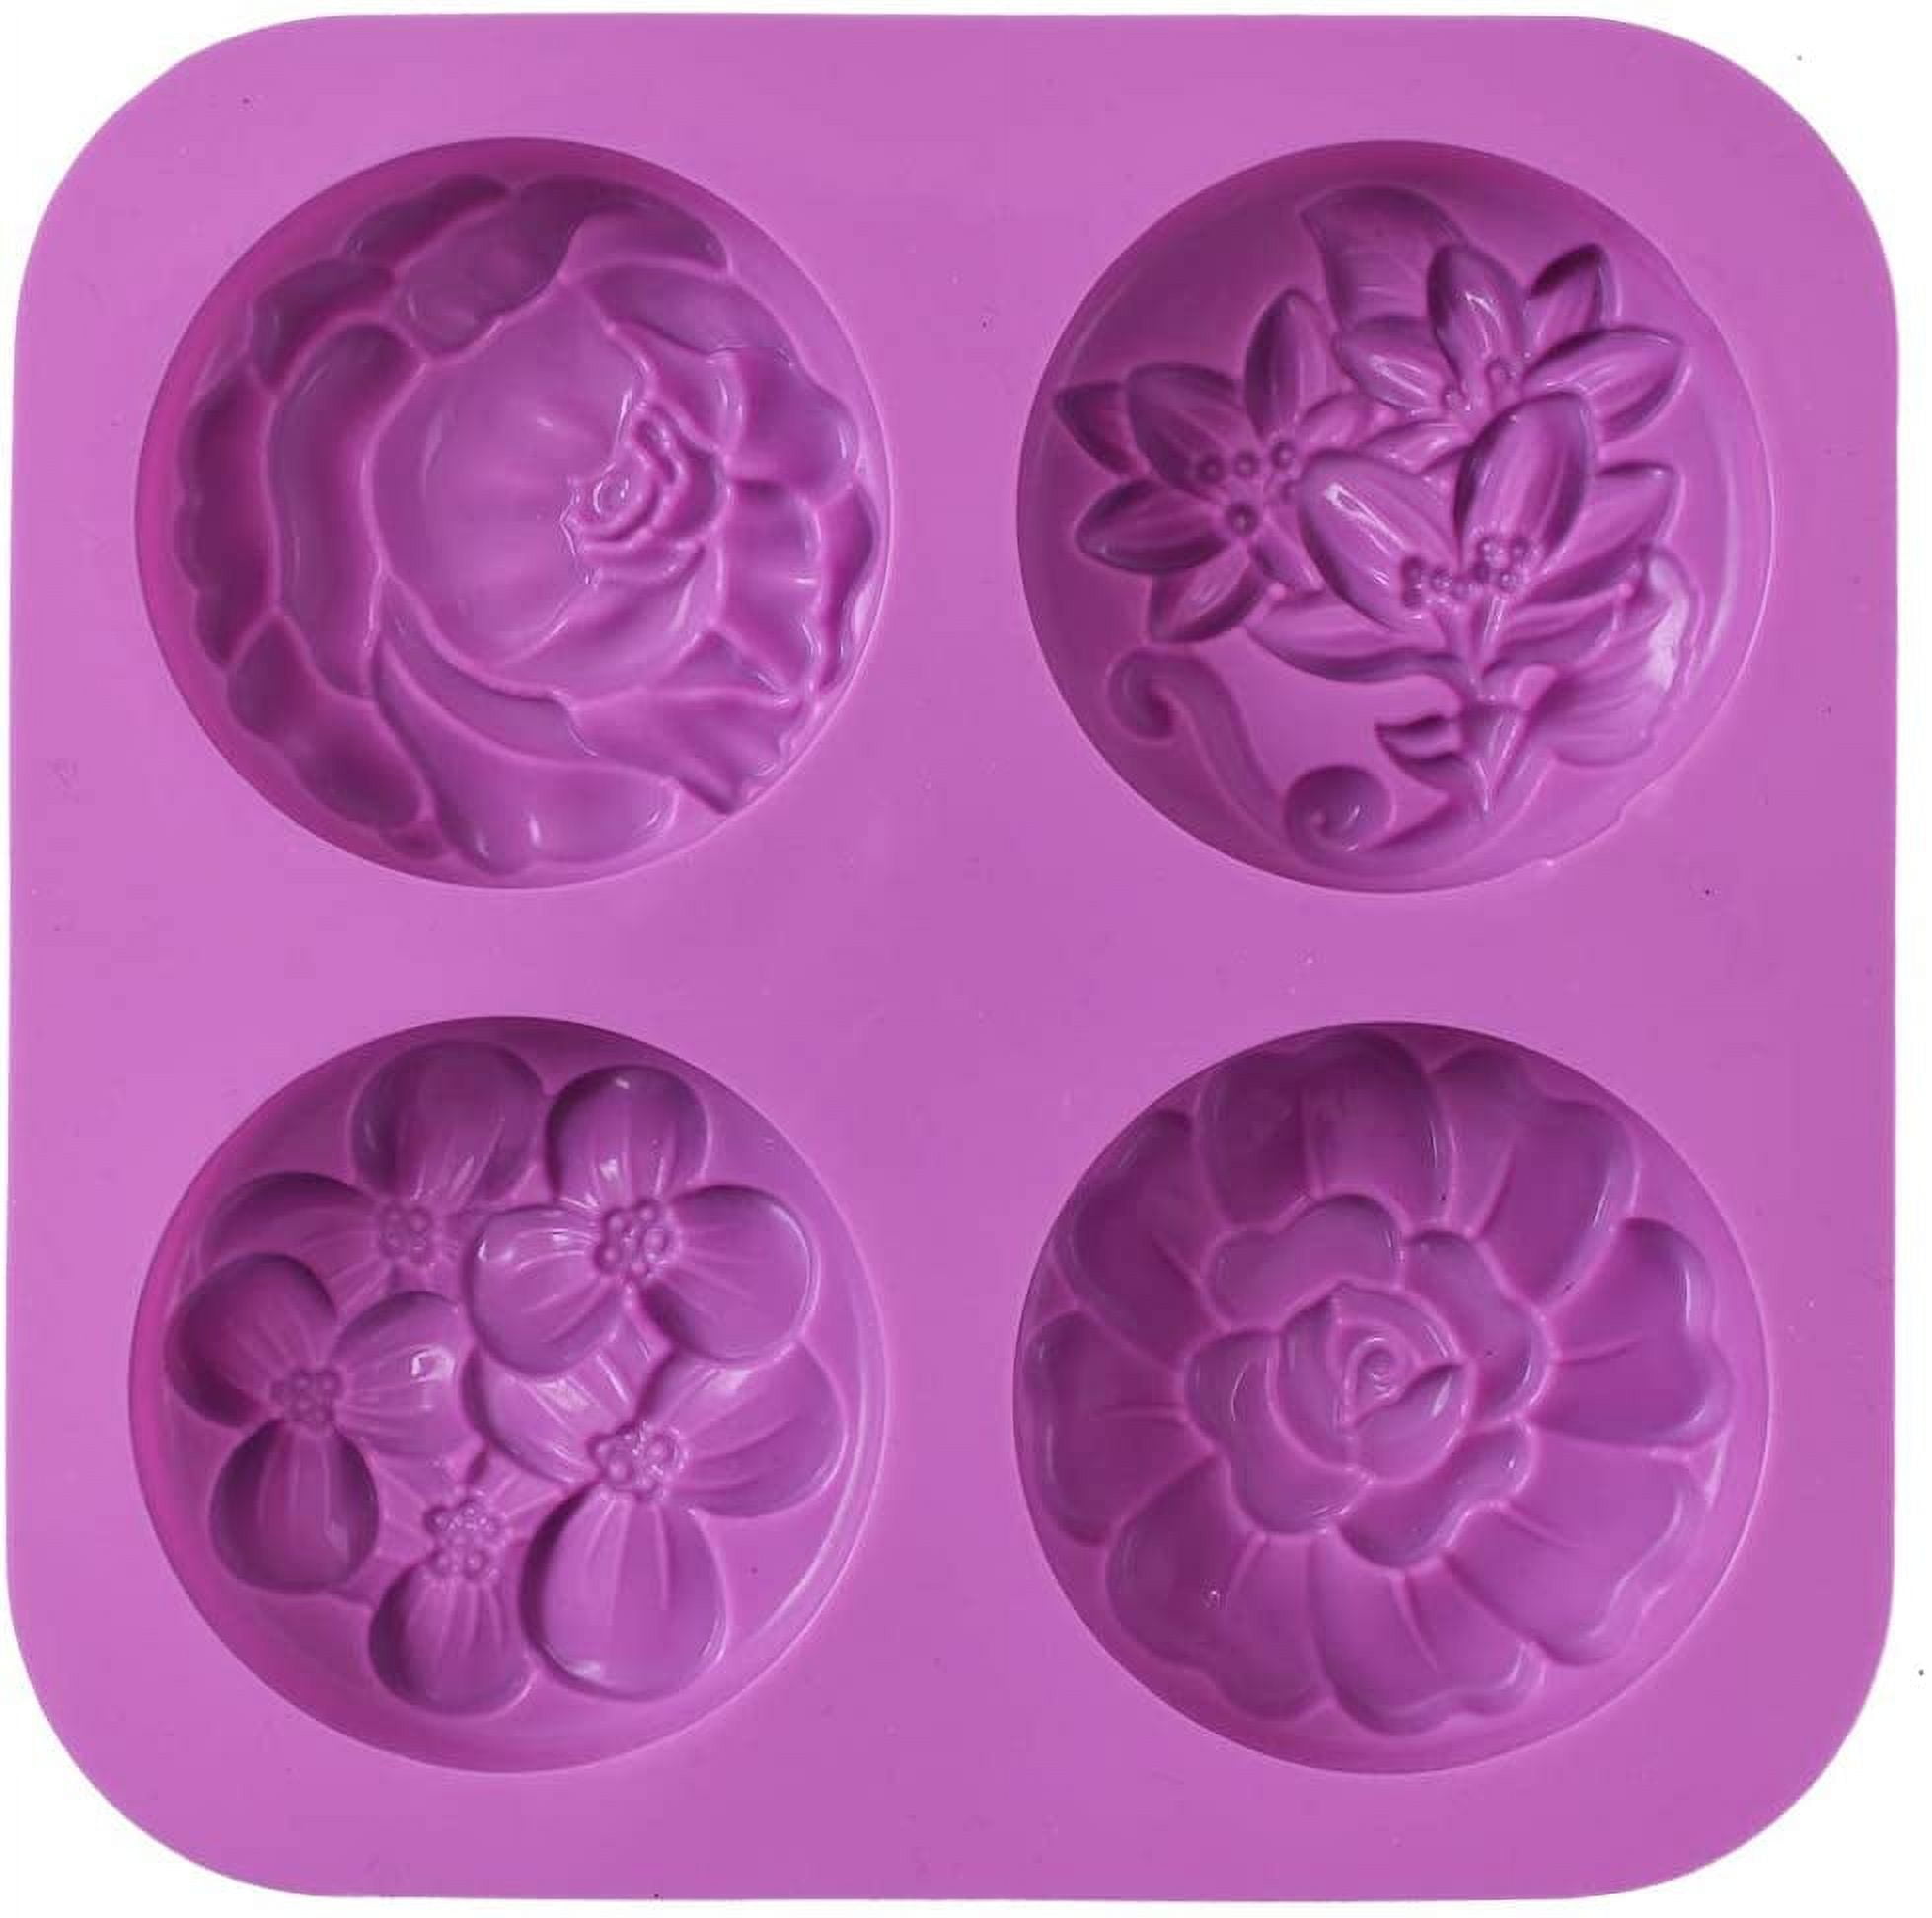 Ankexin Soap Silicone Mold 4 Cavities Square Flower Baking Molds for Soap  Candles Jelly